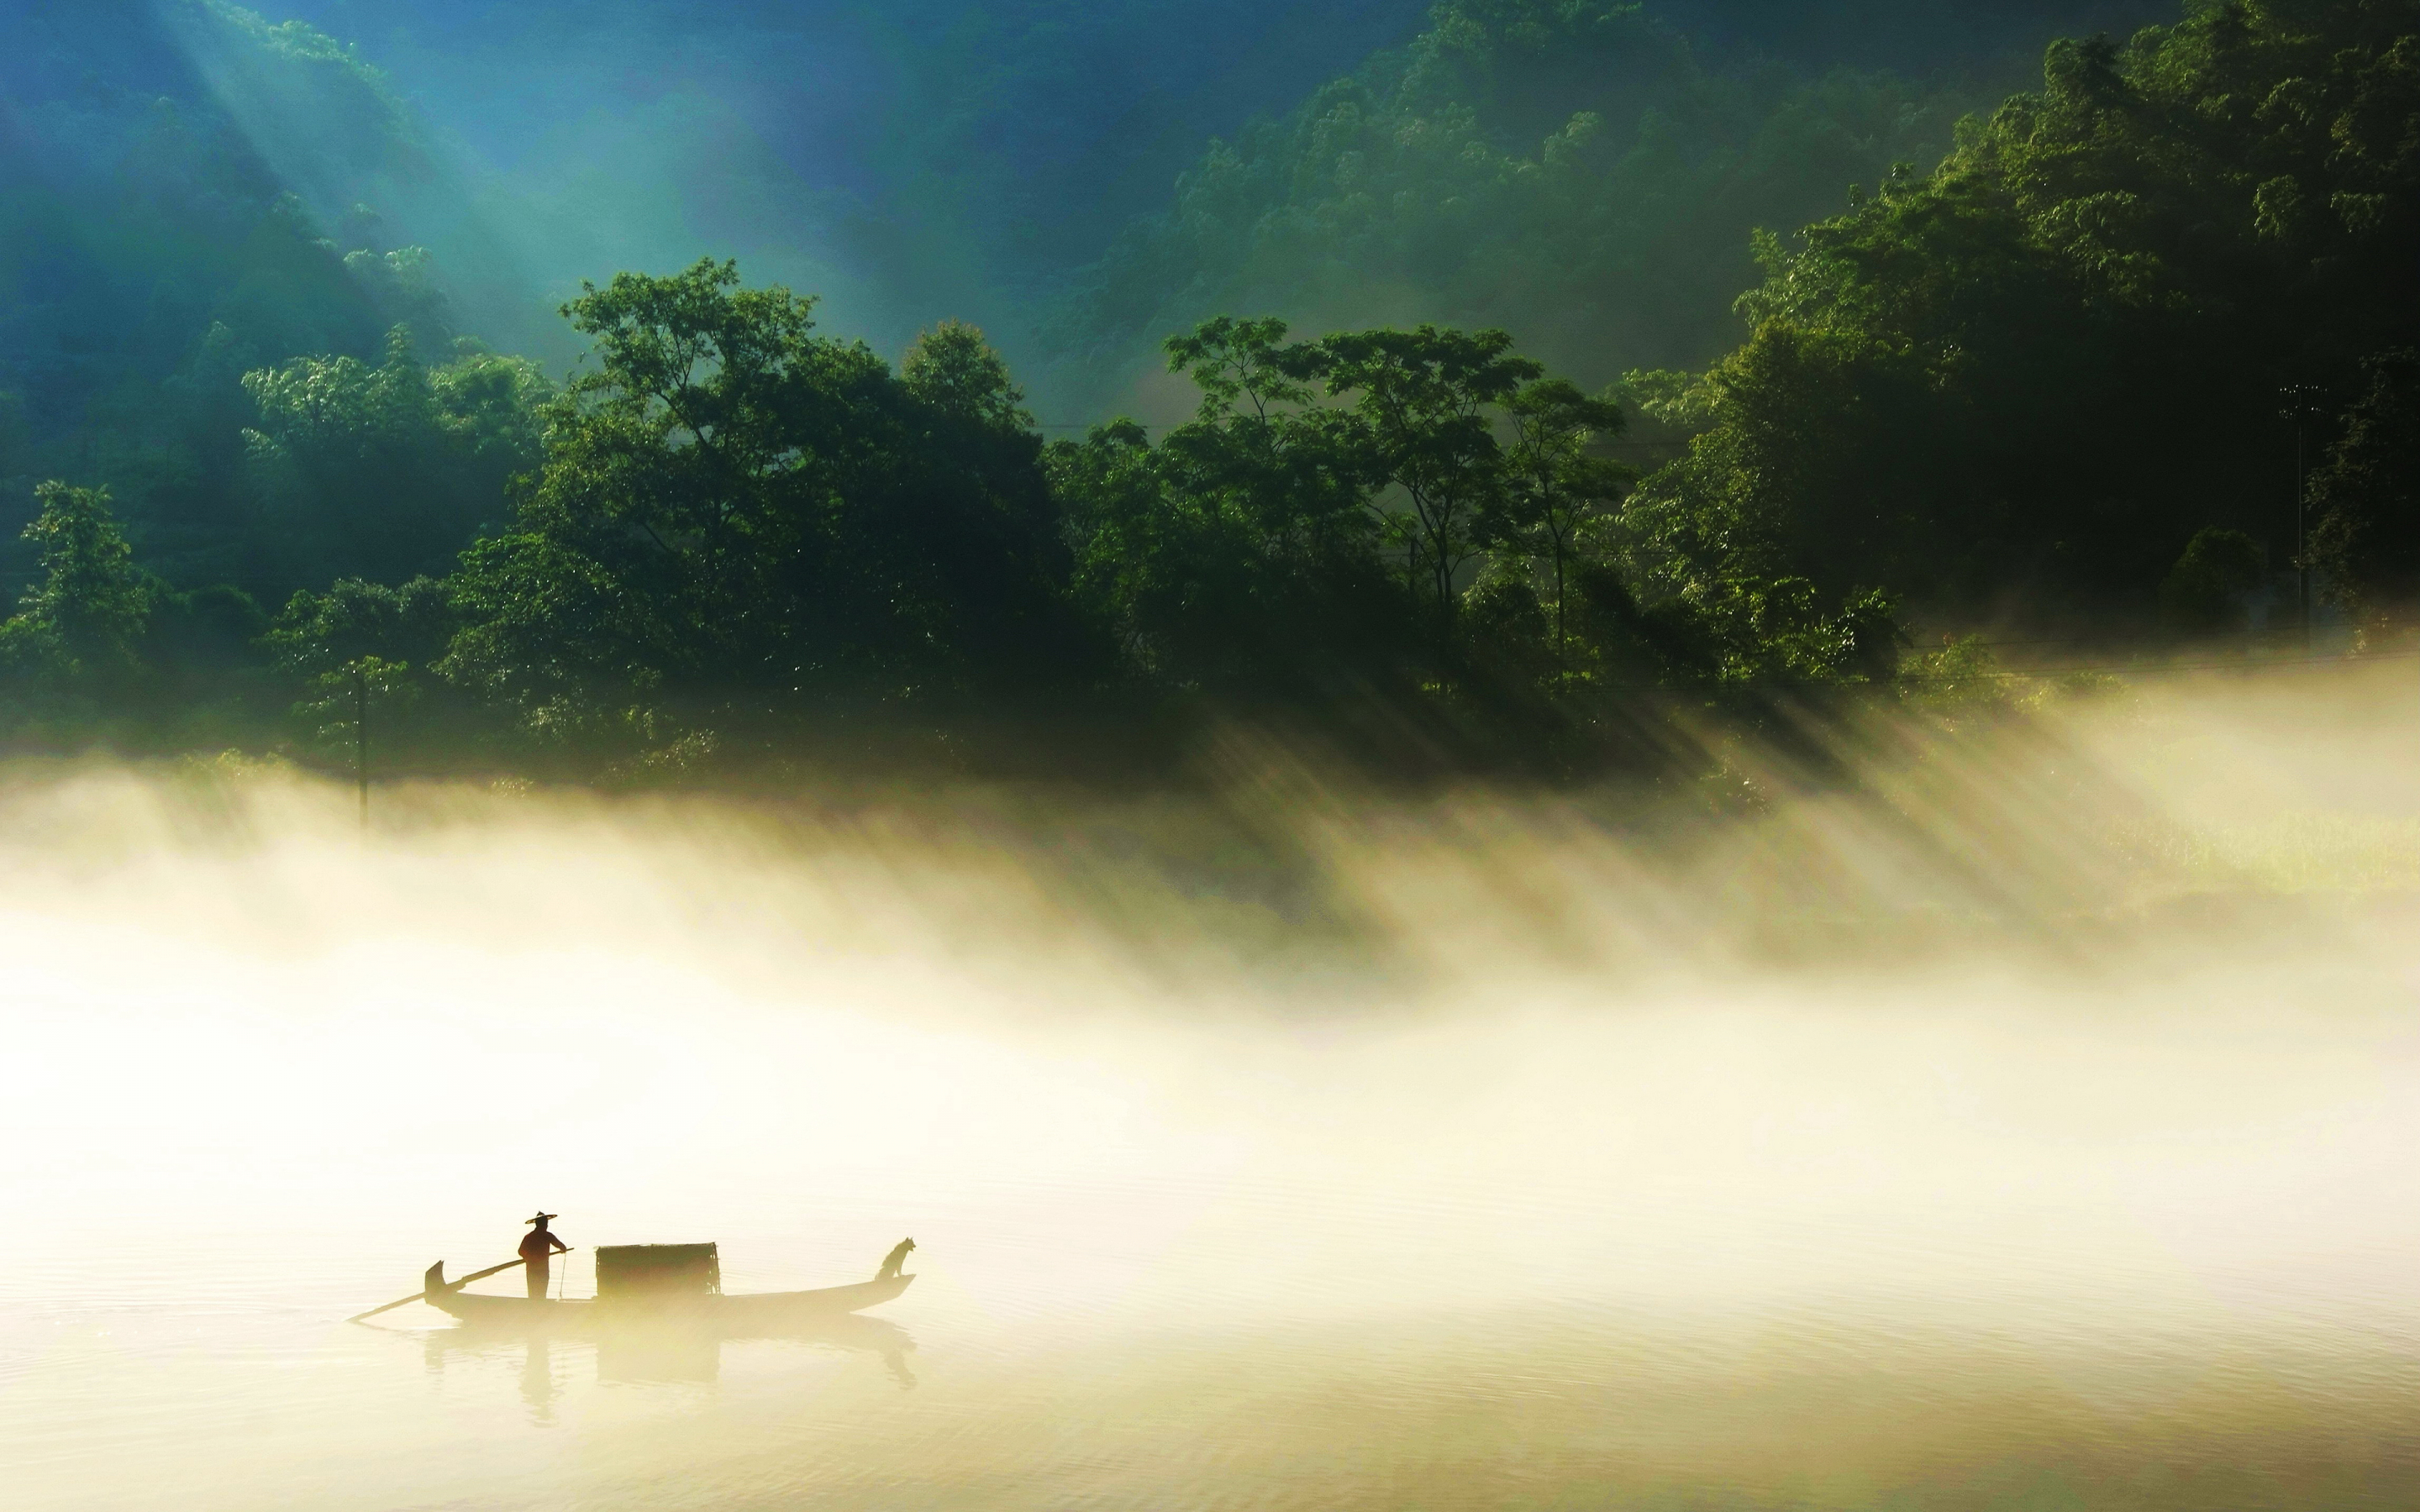 Lake, misty day, fisherman, countryside, foggy forest, nature, 2880x1800 wallpaper